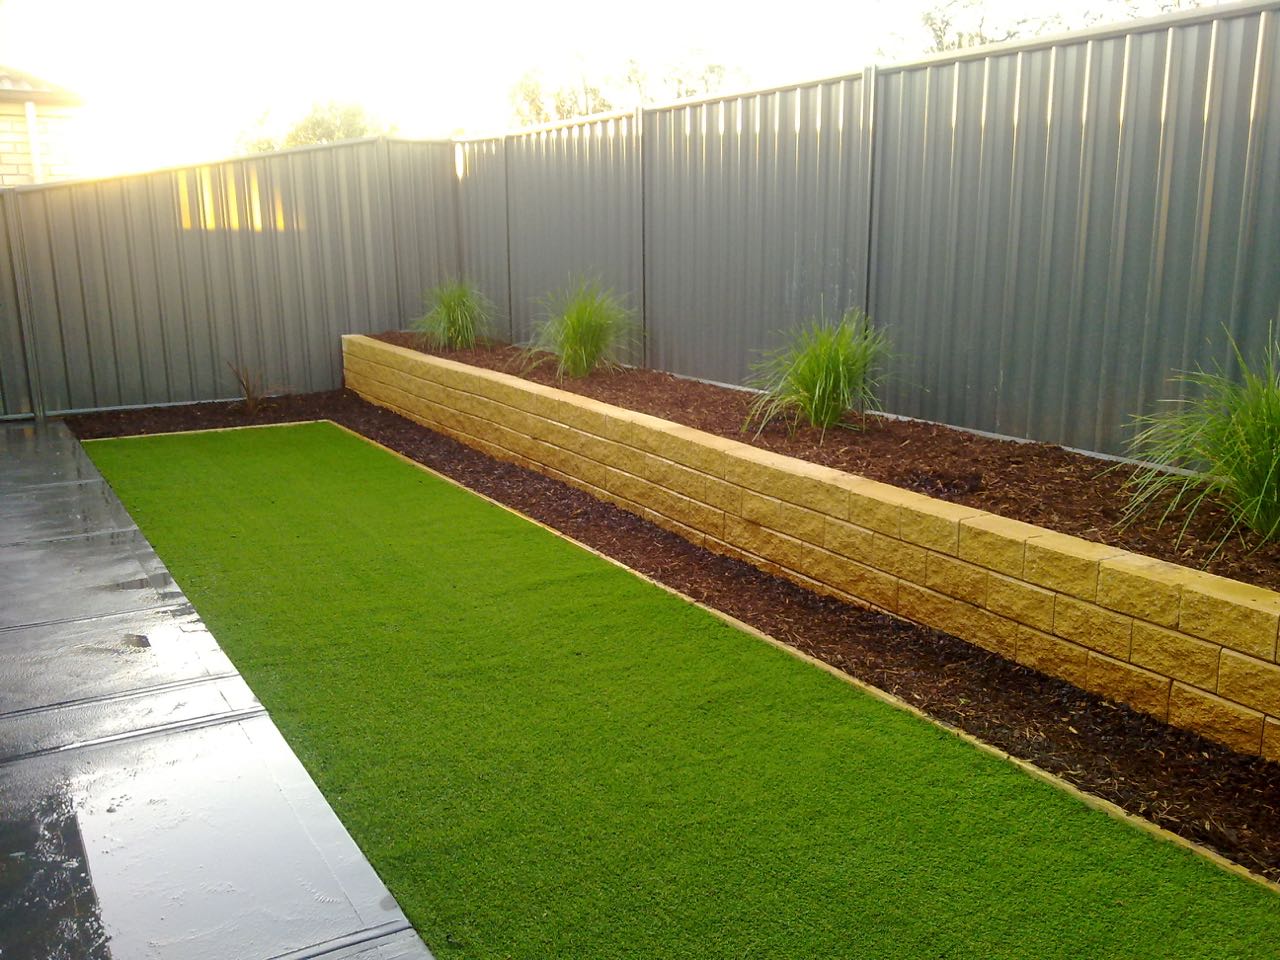 Andrews Farm - Retaining Wall With Garden Bed For Plants